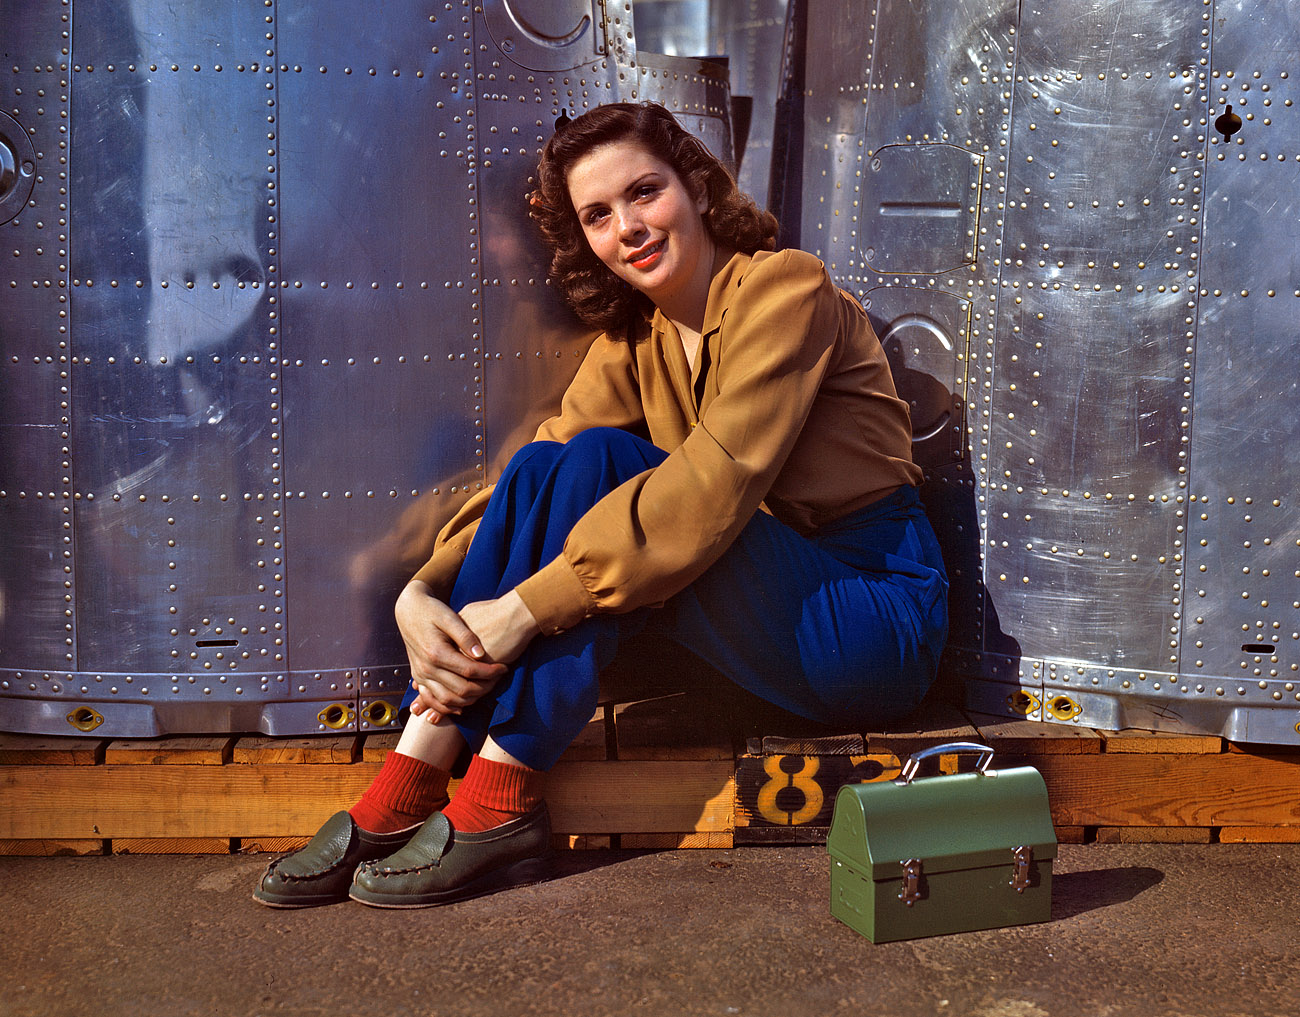 October 1942. "Noontime rest for an assembly worker at the Long Beach, Calif., plant of Douglas Aircraft Company. Nacelle parts for a heavy bomber form the background." View full size. 4x5 Kodachrome transparency by Alfred Palmer.